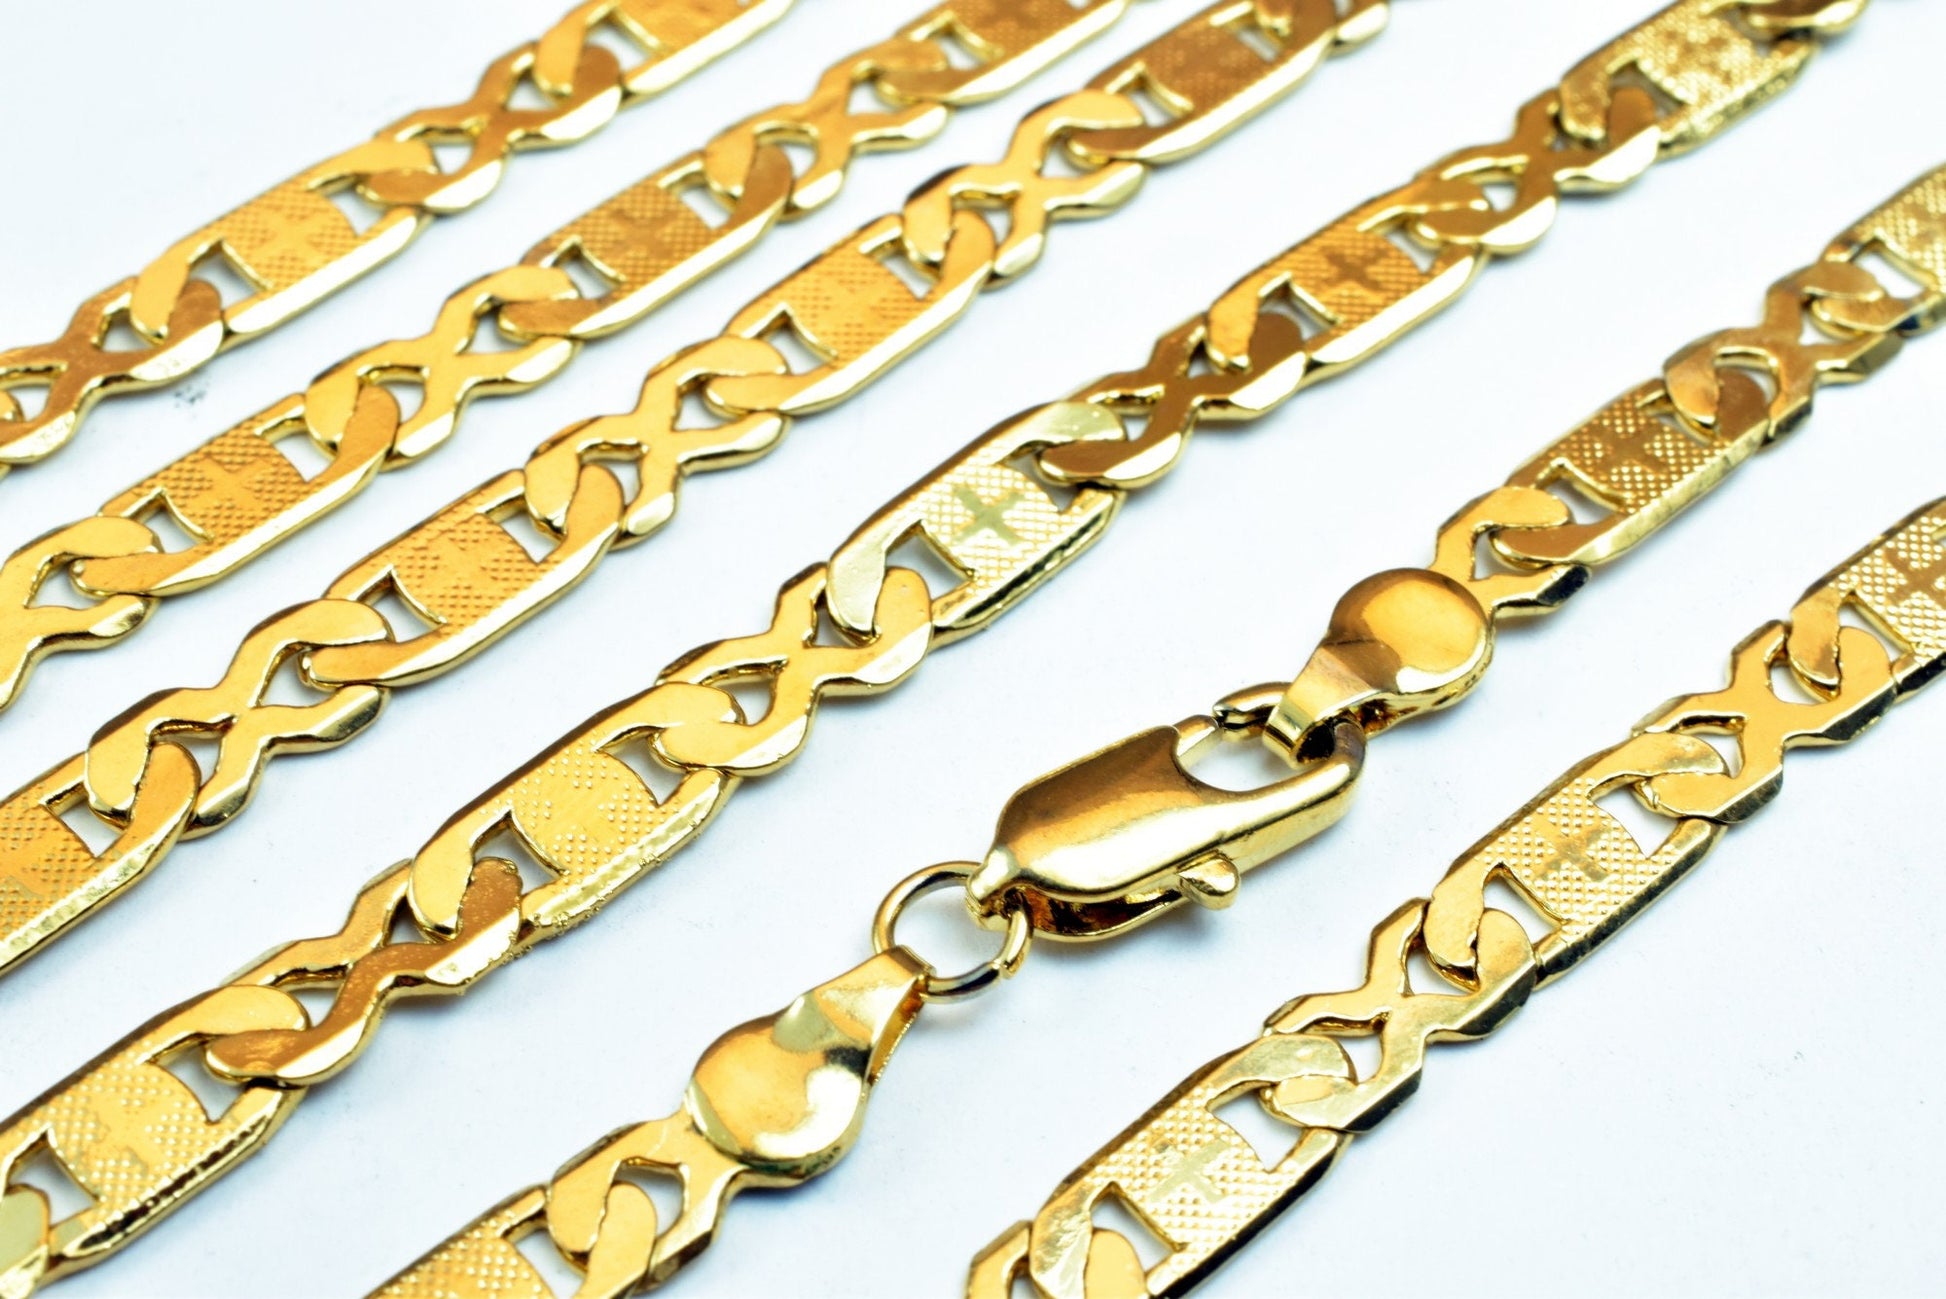 18K Gold Filled EP Anchor/Mariner/Rambo Chain Diamond Cut Style 17" Inches Long Width 5mm/Thickness 1mm/ Findings for Jewelry Making CG478